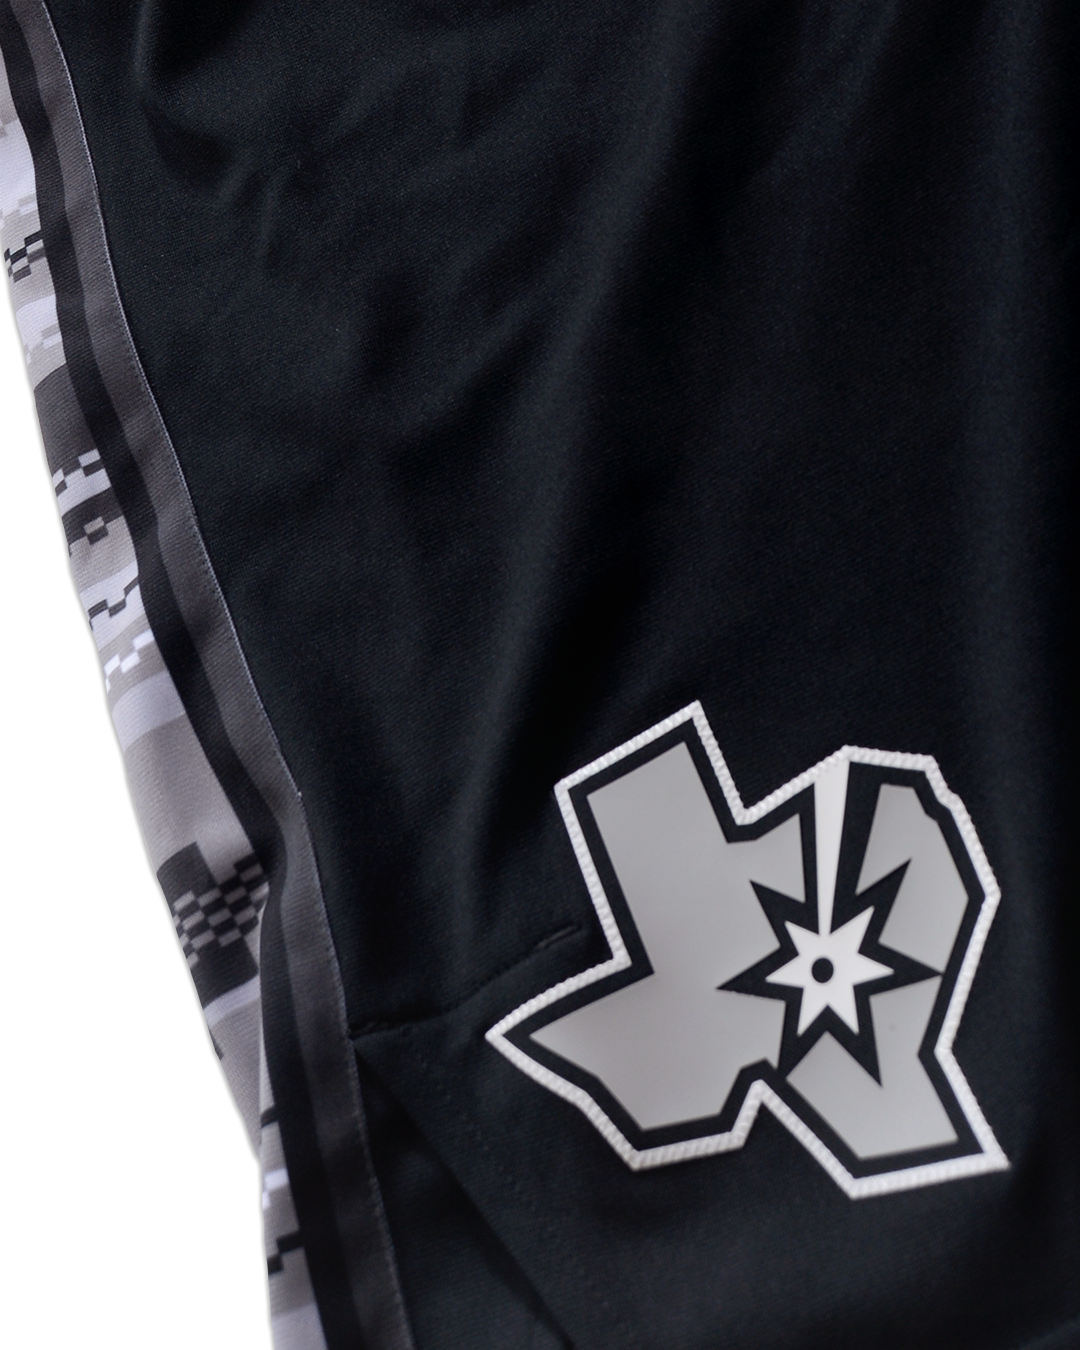 Spurs unveil new Statement Edition Jersey honoring team's Texas history -  Pounding The Rock